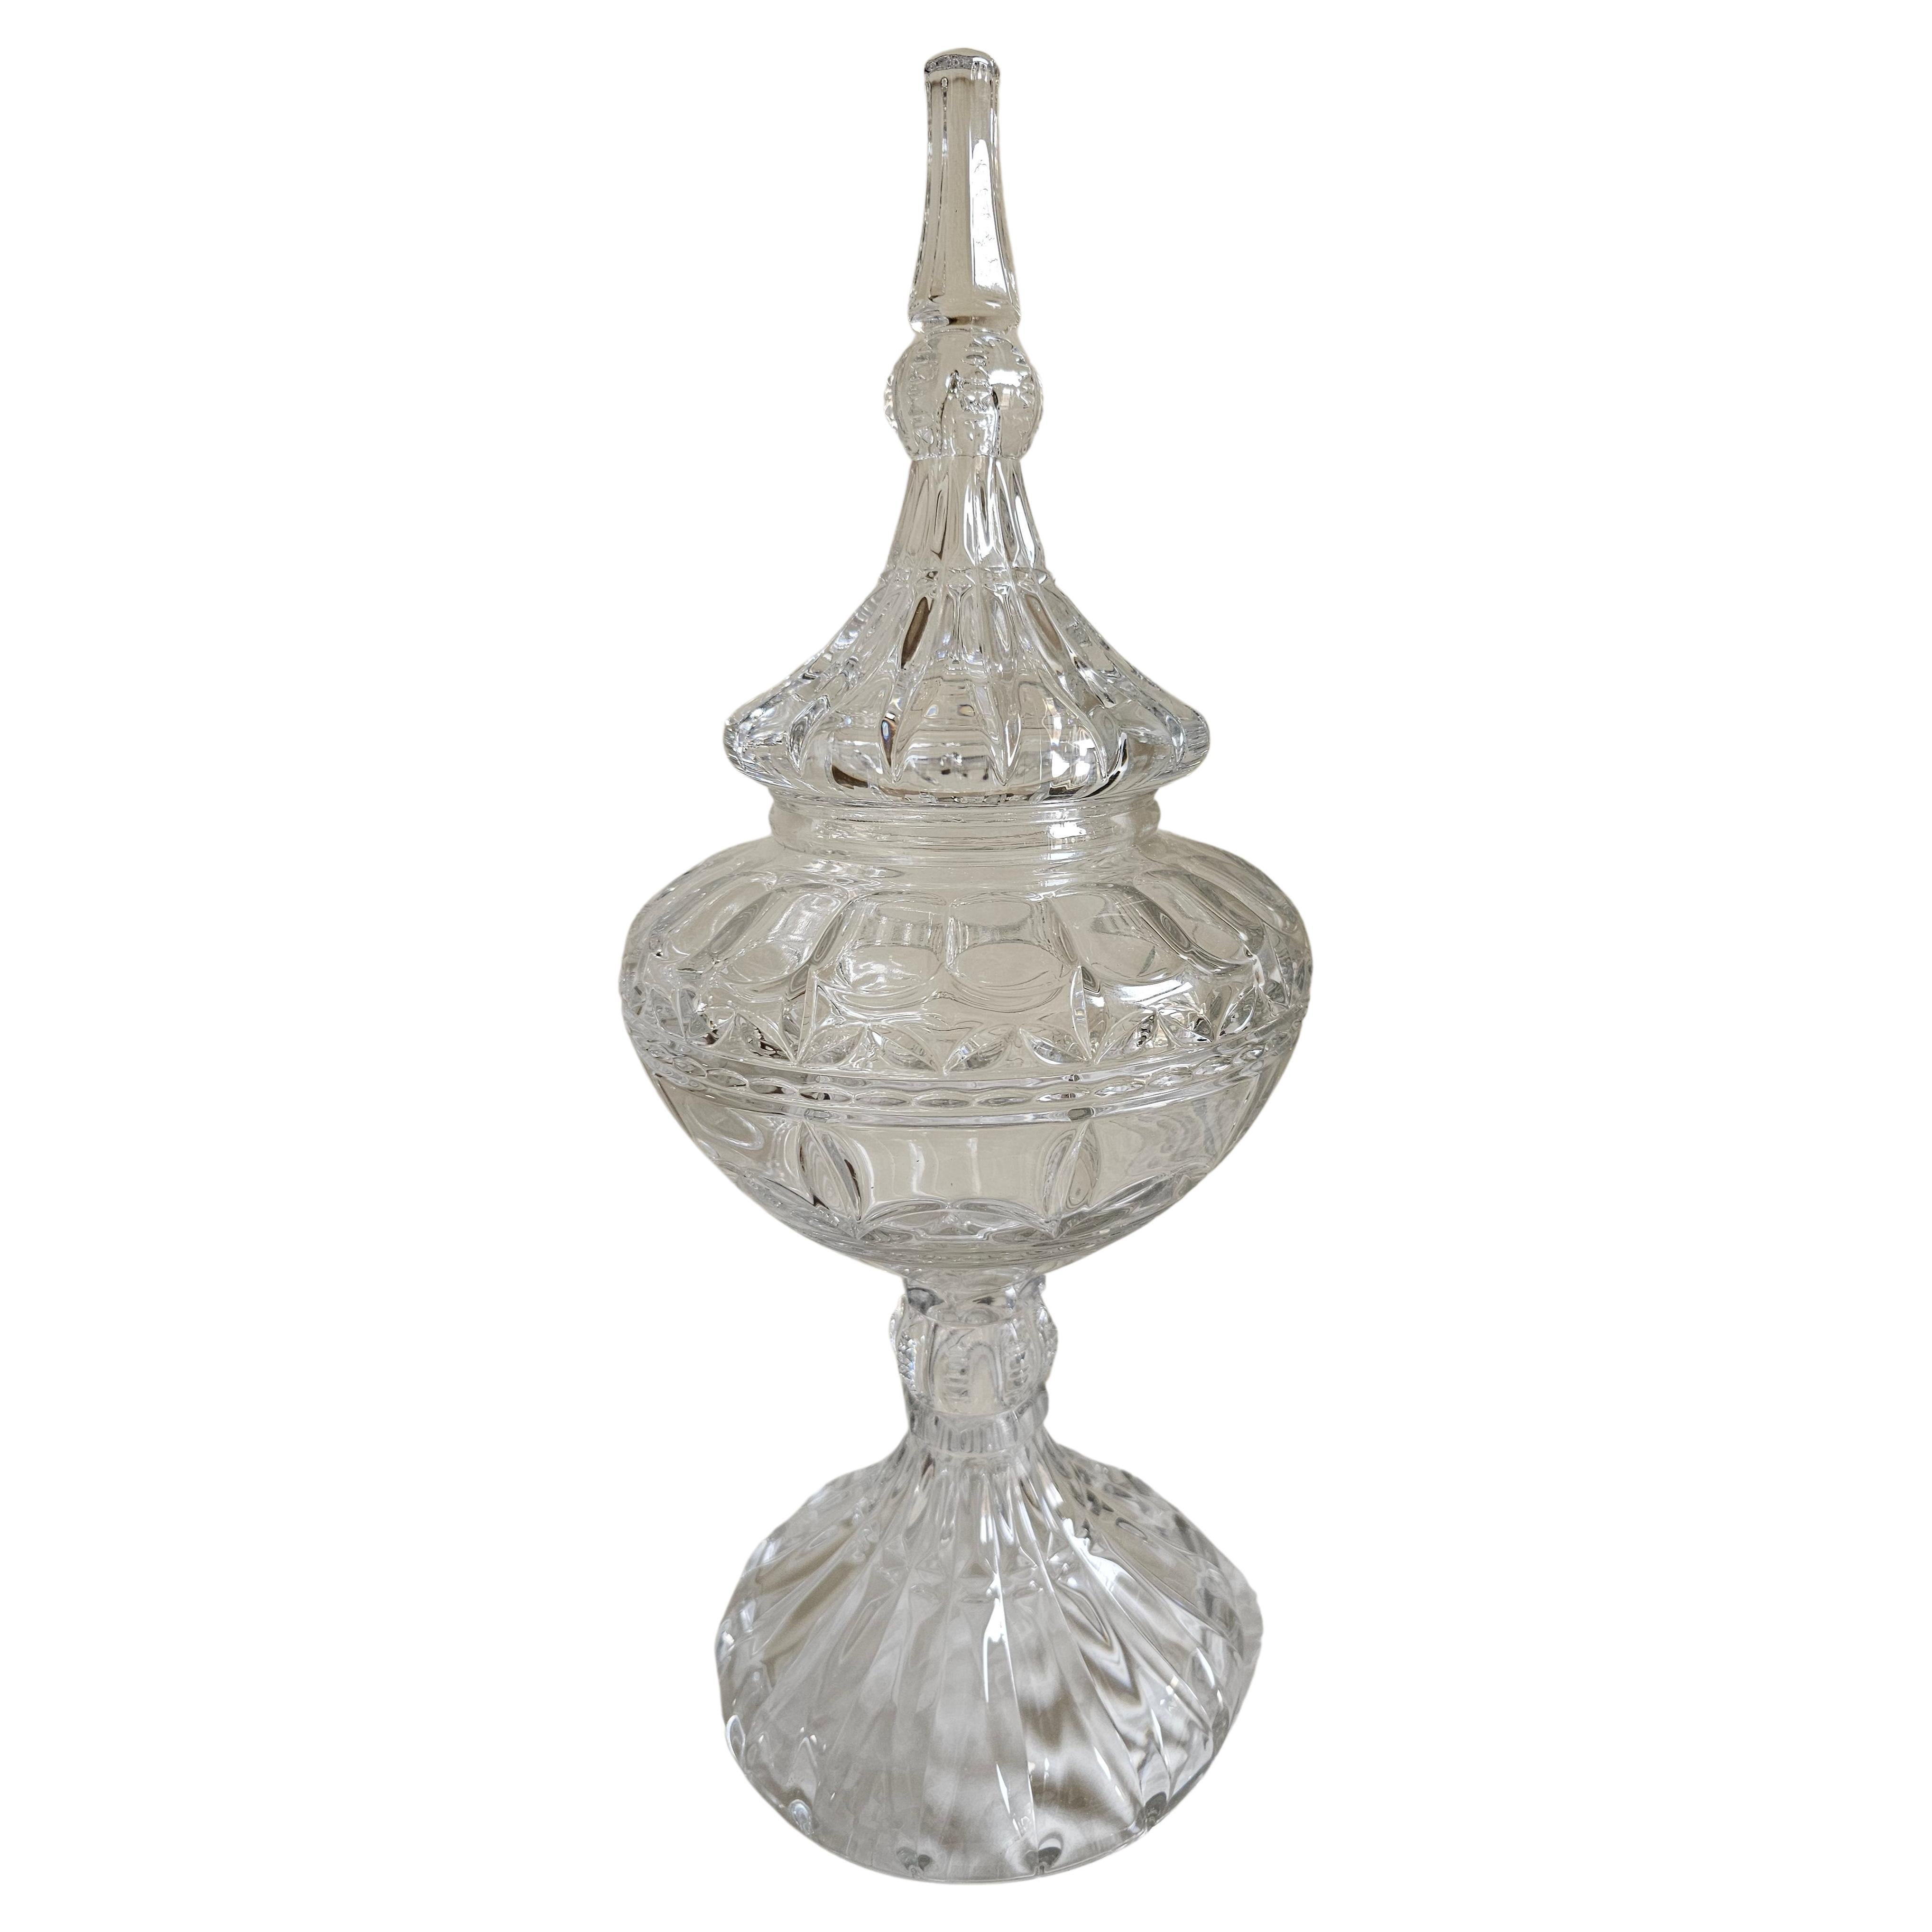 Marquis By Waterford Crystal Covered Urn or vase. Use it just as ornament or as candy or just as storage. Measures 18.5